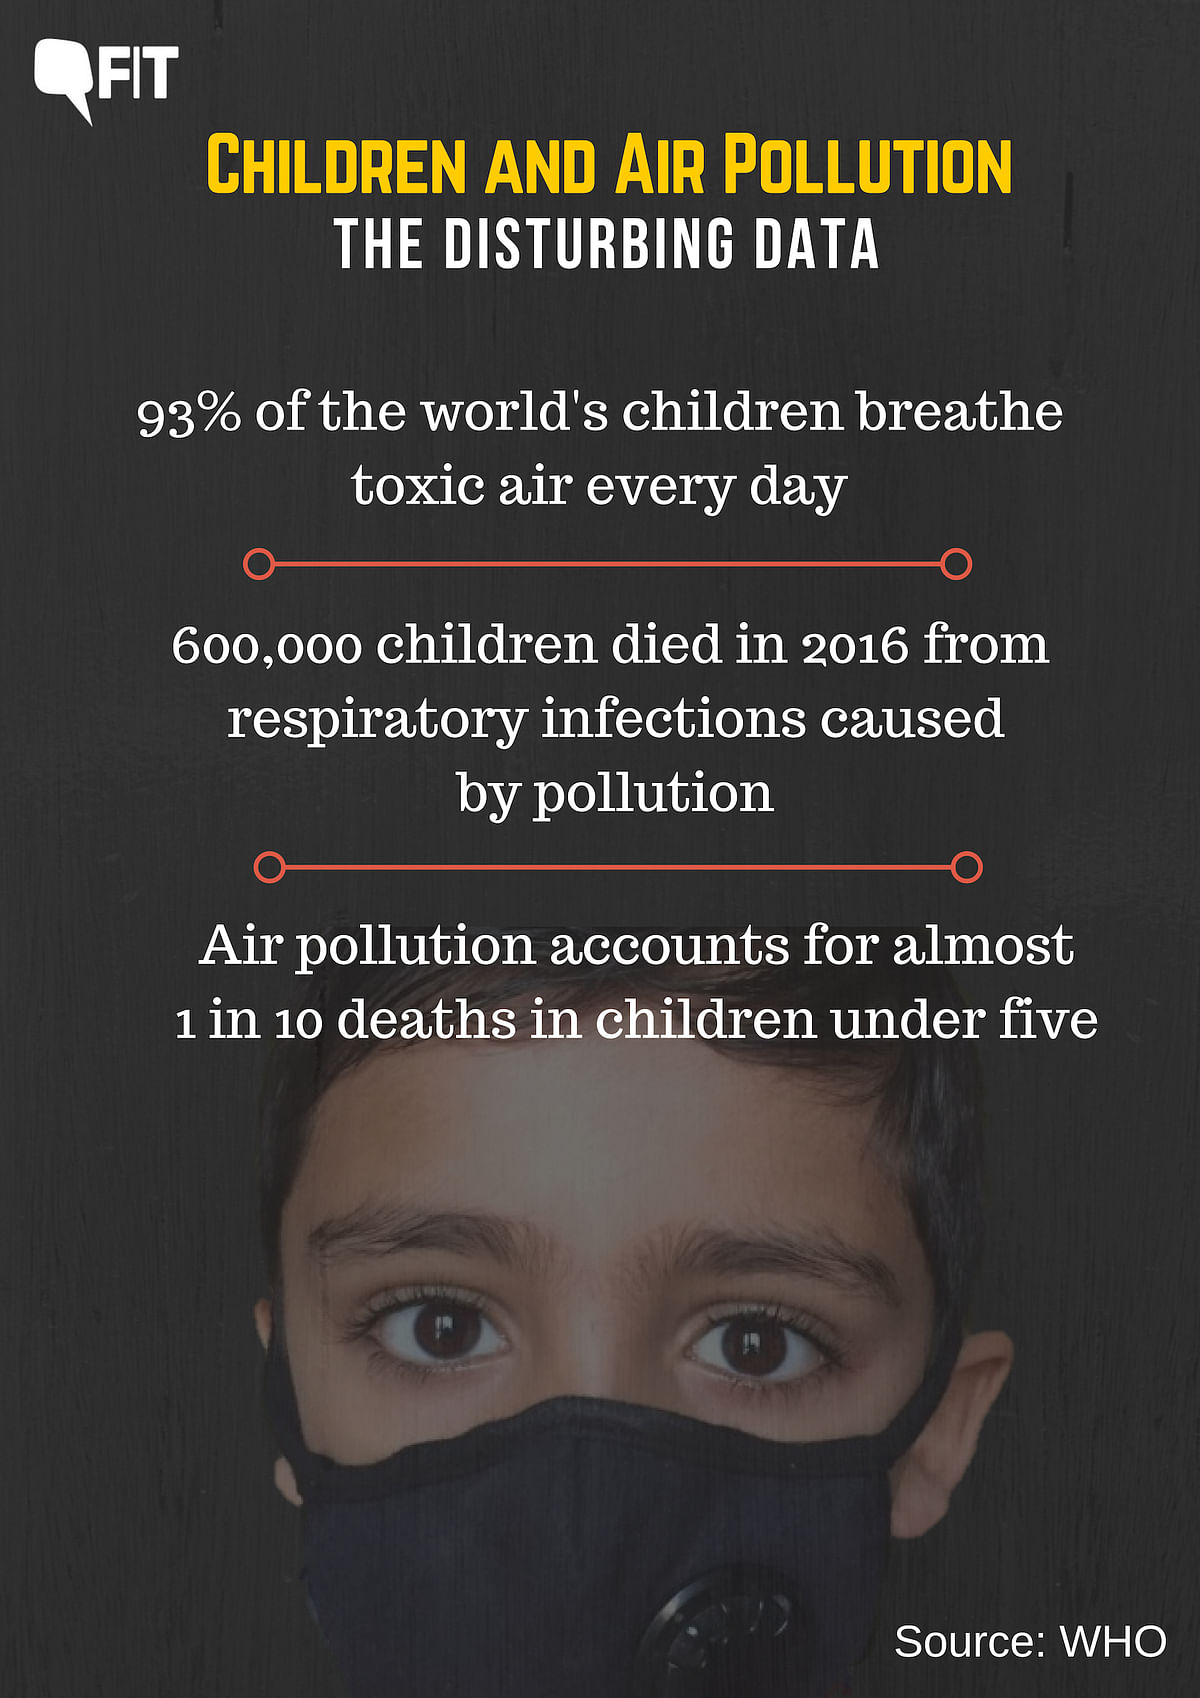 Air pollution is one of the leading threats to child health, accounting for almost 1 in 10 deaths in kids under 5.